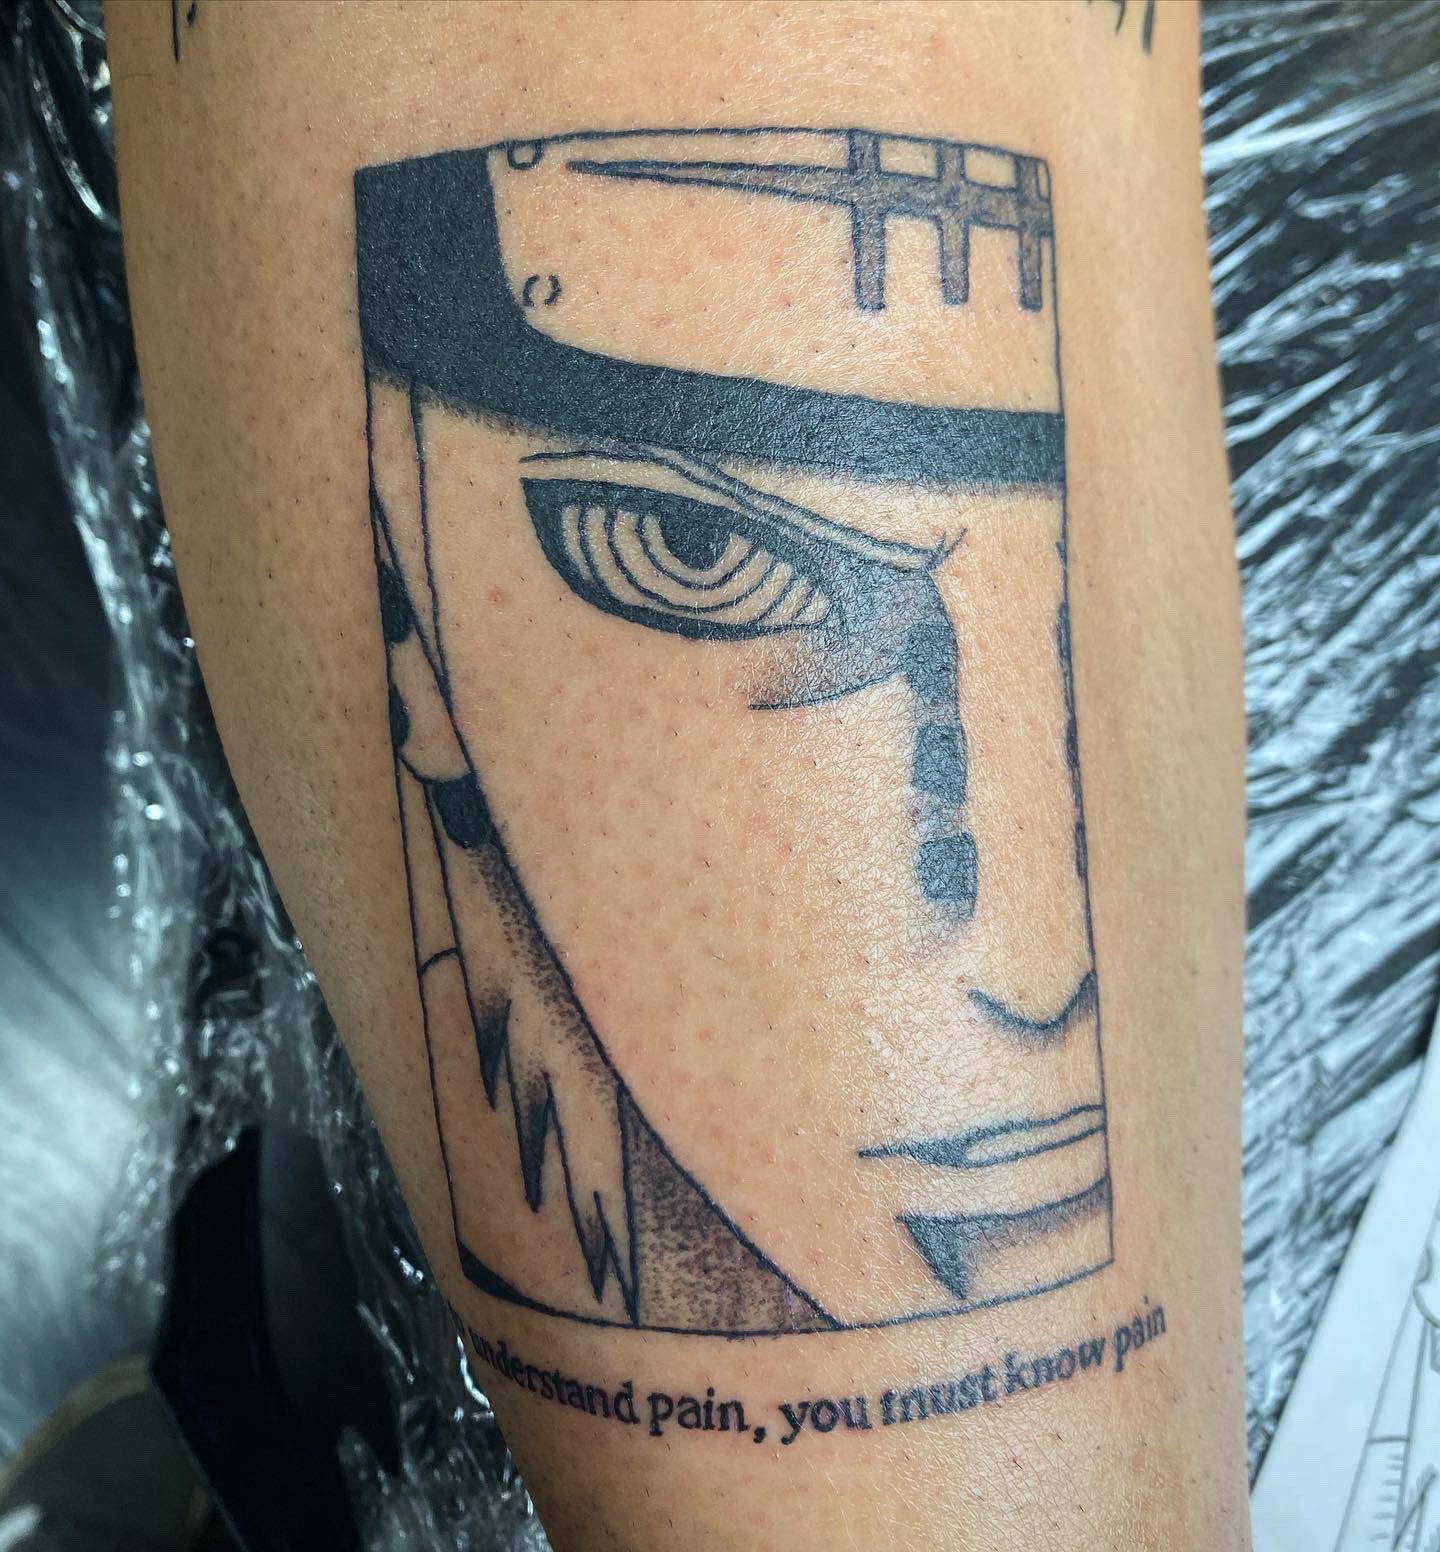 Publicado por @animemasterink: #naruto tattoo done by @nicklimpzTo submit  your work use the tag #animemasterinkAnd don't forget to share our page  too!#sponsoredartist #sponsoredpost #tattoo #tattoos #blacktattoo  #blacktattooart #tatuaje #tatuajes ...